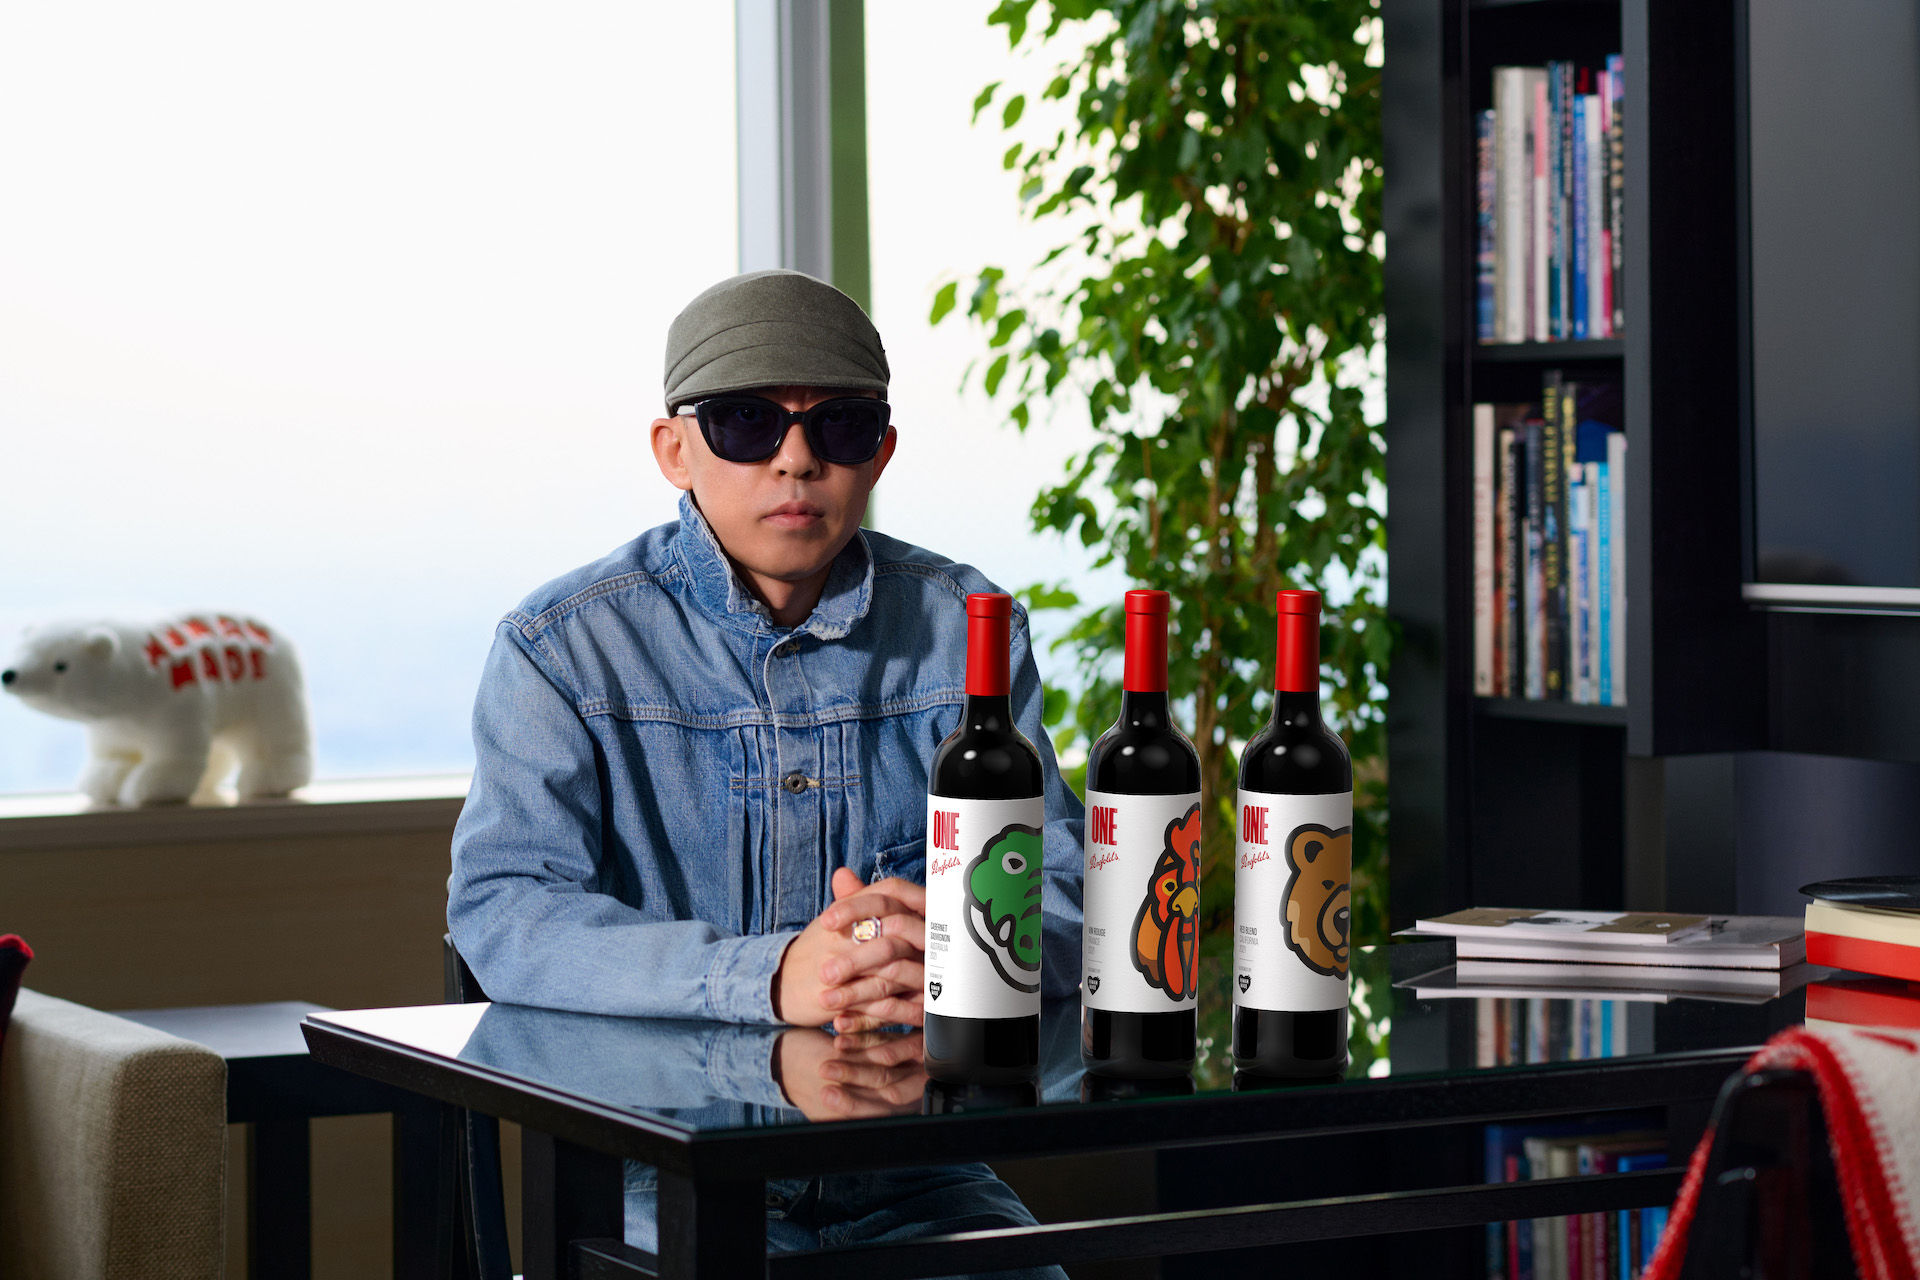 Nigo, the godfather of streetwear as we know it, makes his debut at Kenzo